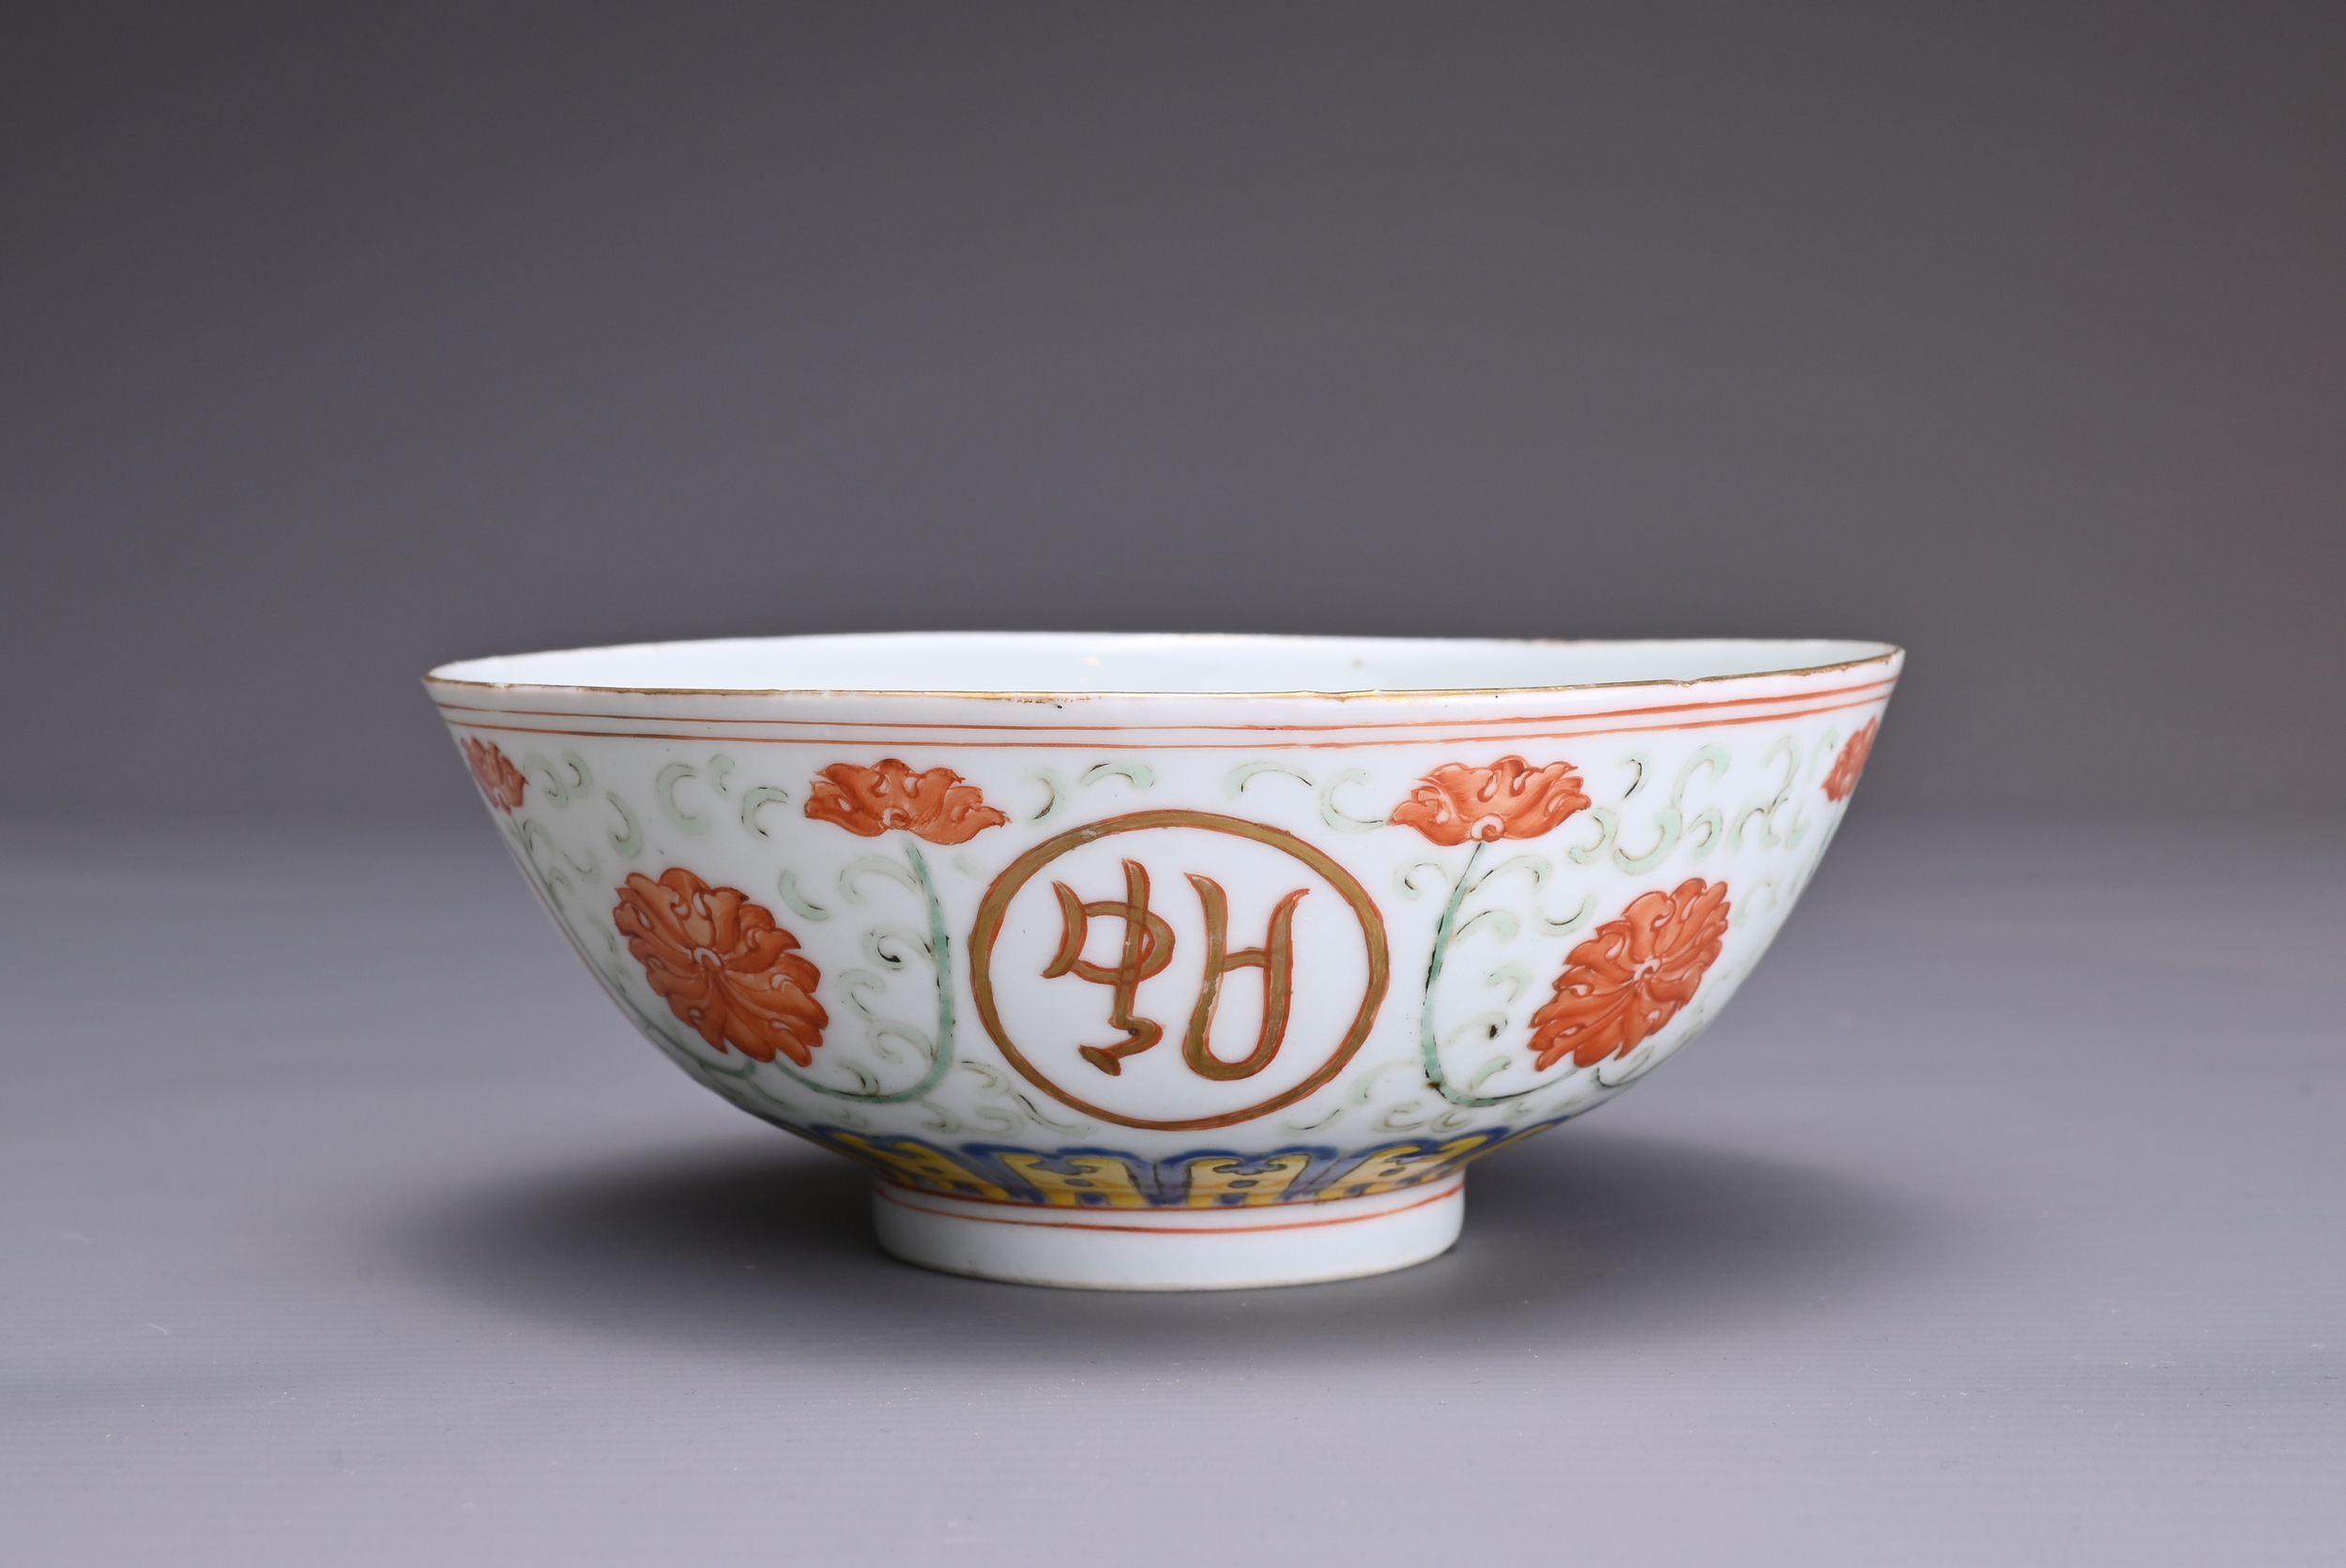 A CHINESE POLYCHROME ENAMEL PORCELAIN BOWL, 19TH CENTURY. Rounded body decorated with - Image 2 of 7